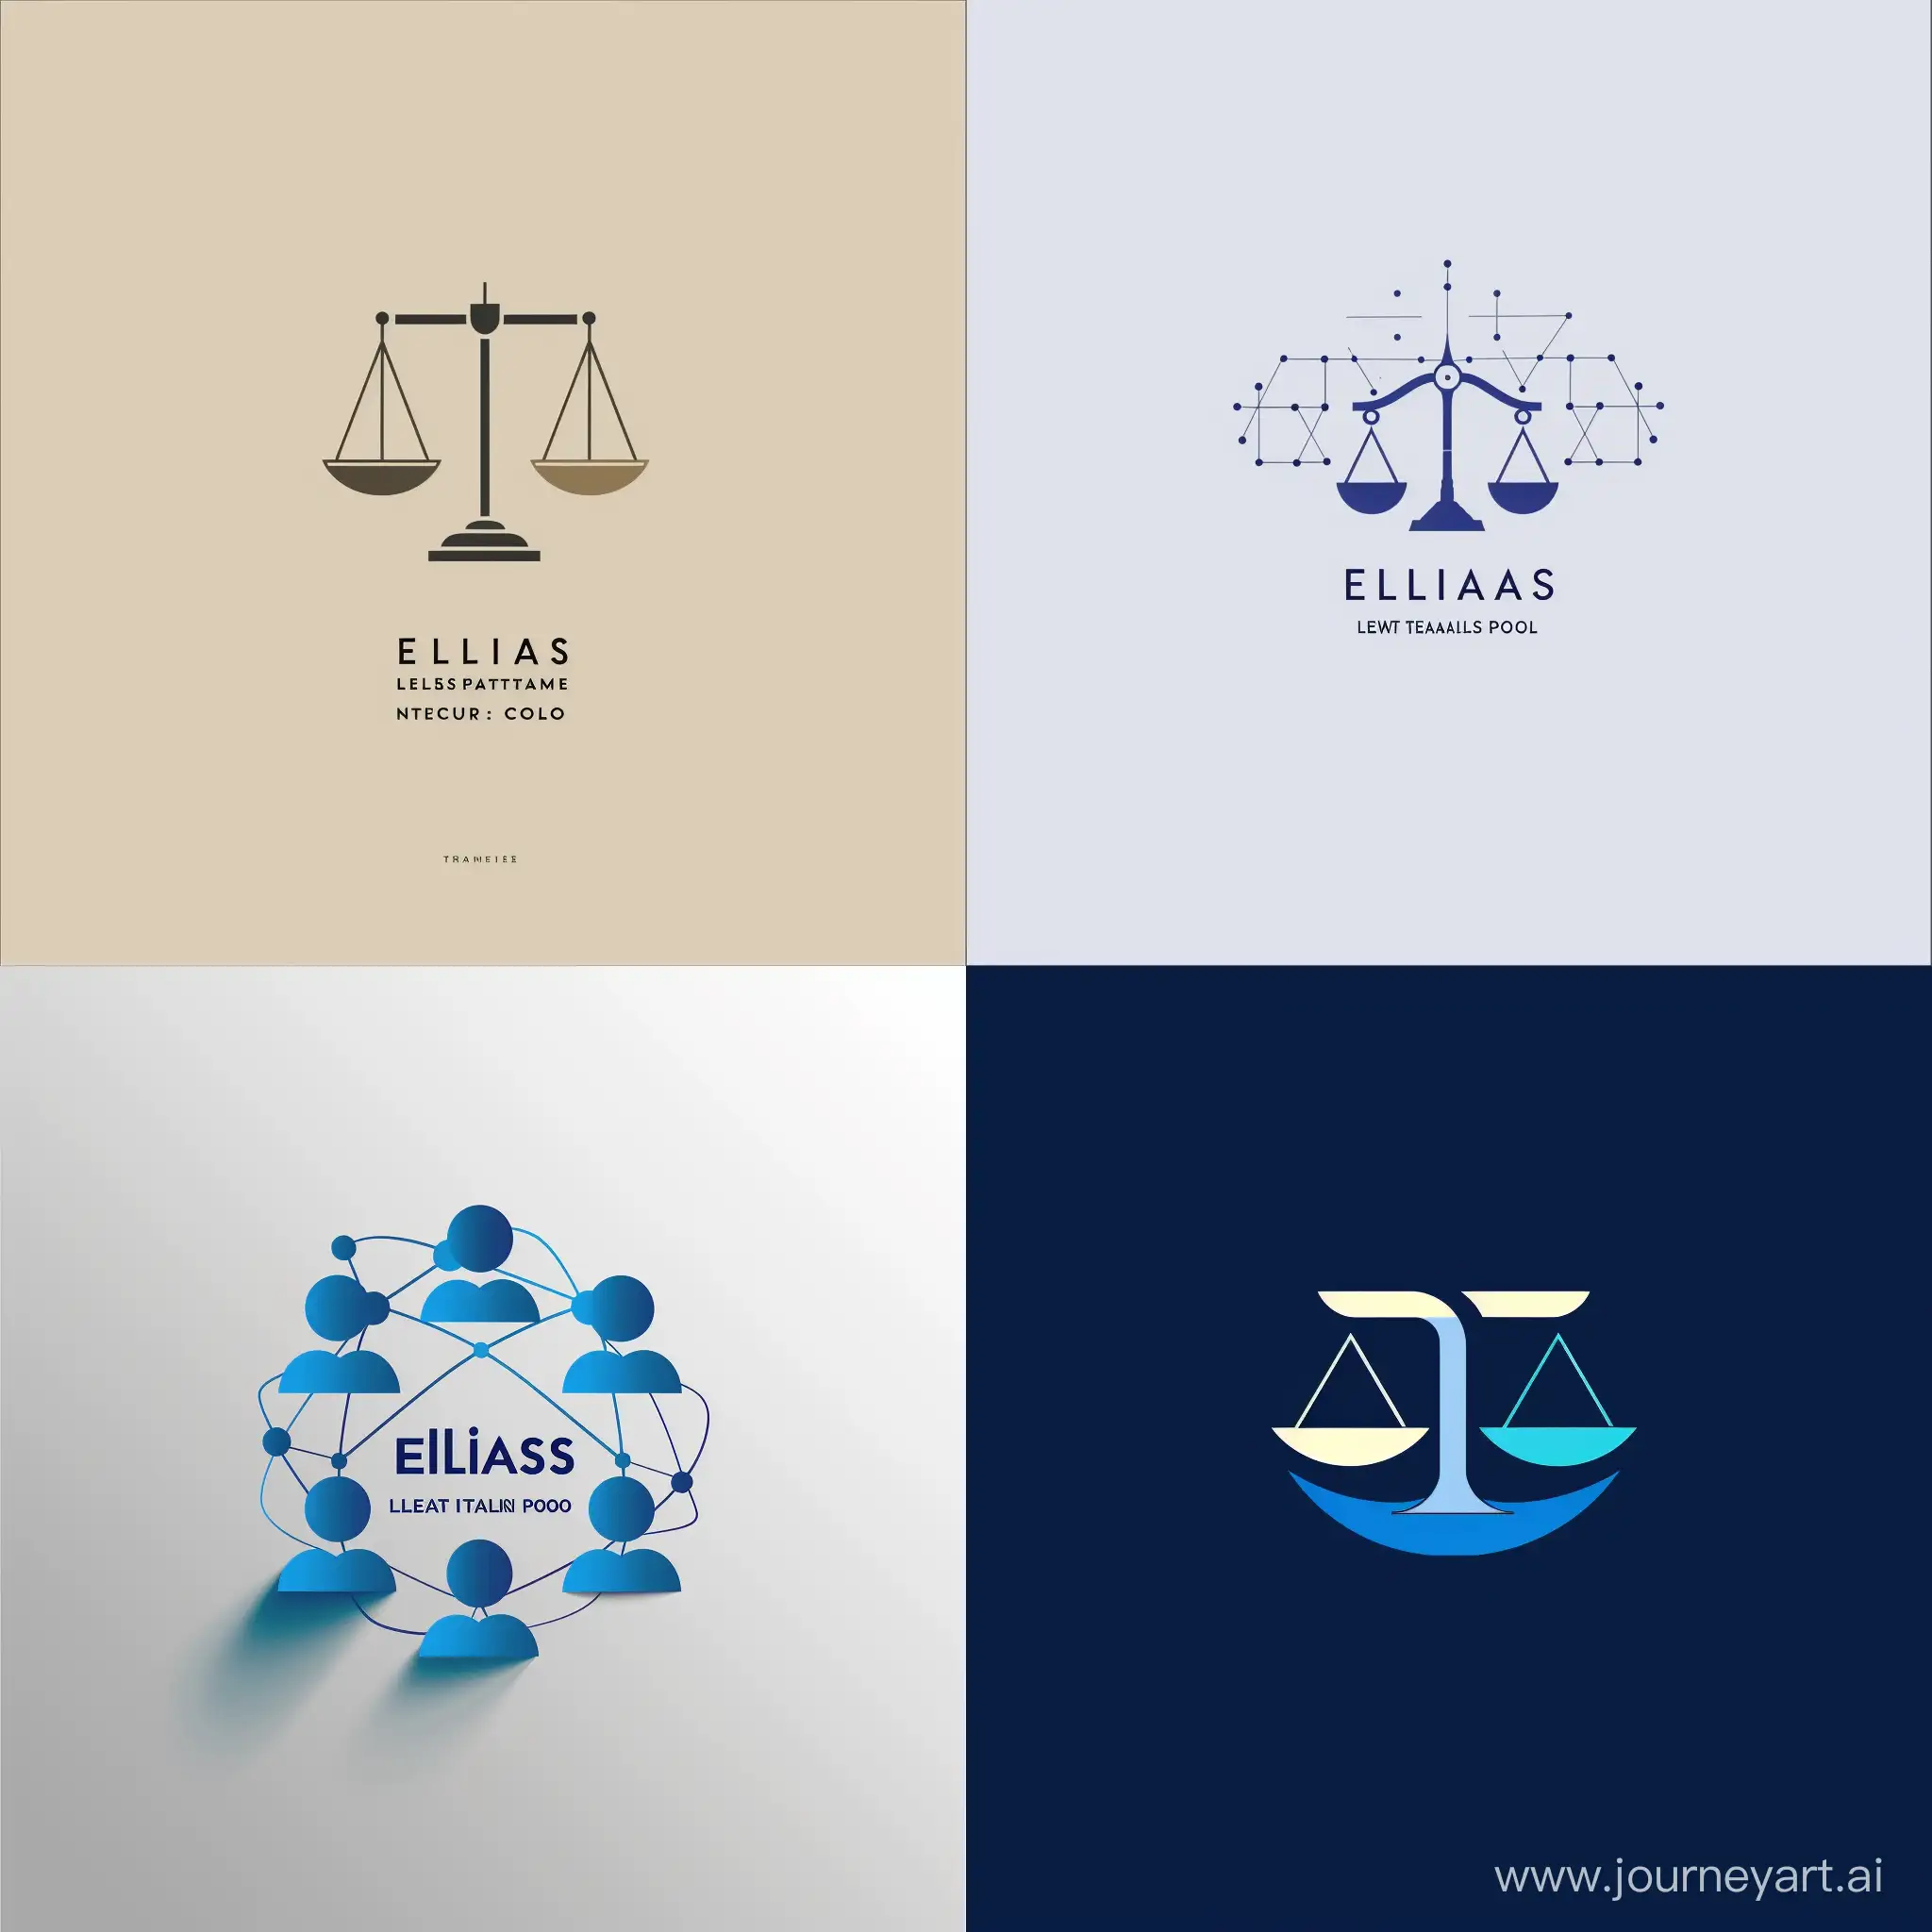 Design a dynamic and visually striking logo for Elias Legal Talent Pool, a revolutionary platform redefining legal recruitment. Incorporate elements that symbolize professionalism, connectivity, and innovation, resembling a fusion of social media and Tinder. Emphasize a modern and sleek aesthetic on a plain background, capturing the essence of this platform as the go-to alternative for seamlessly matching employers with pre-qualified legal candidates. Consider using a distinctive icon or symbol to represent networking and collaboration within the legal profession while maintaining a clean and sophisticated look.